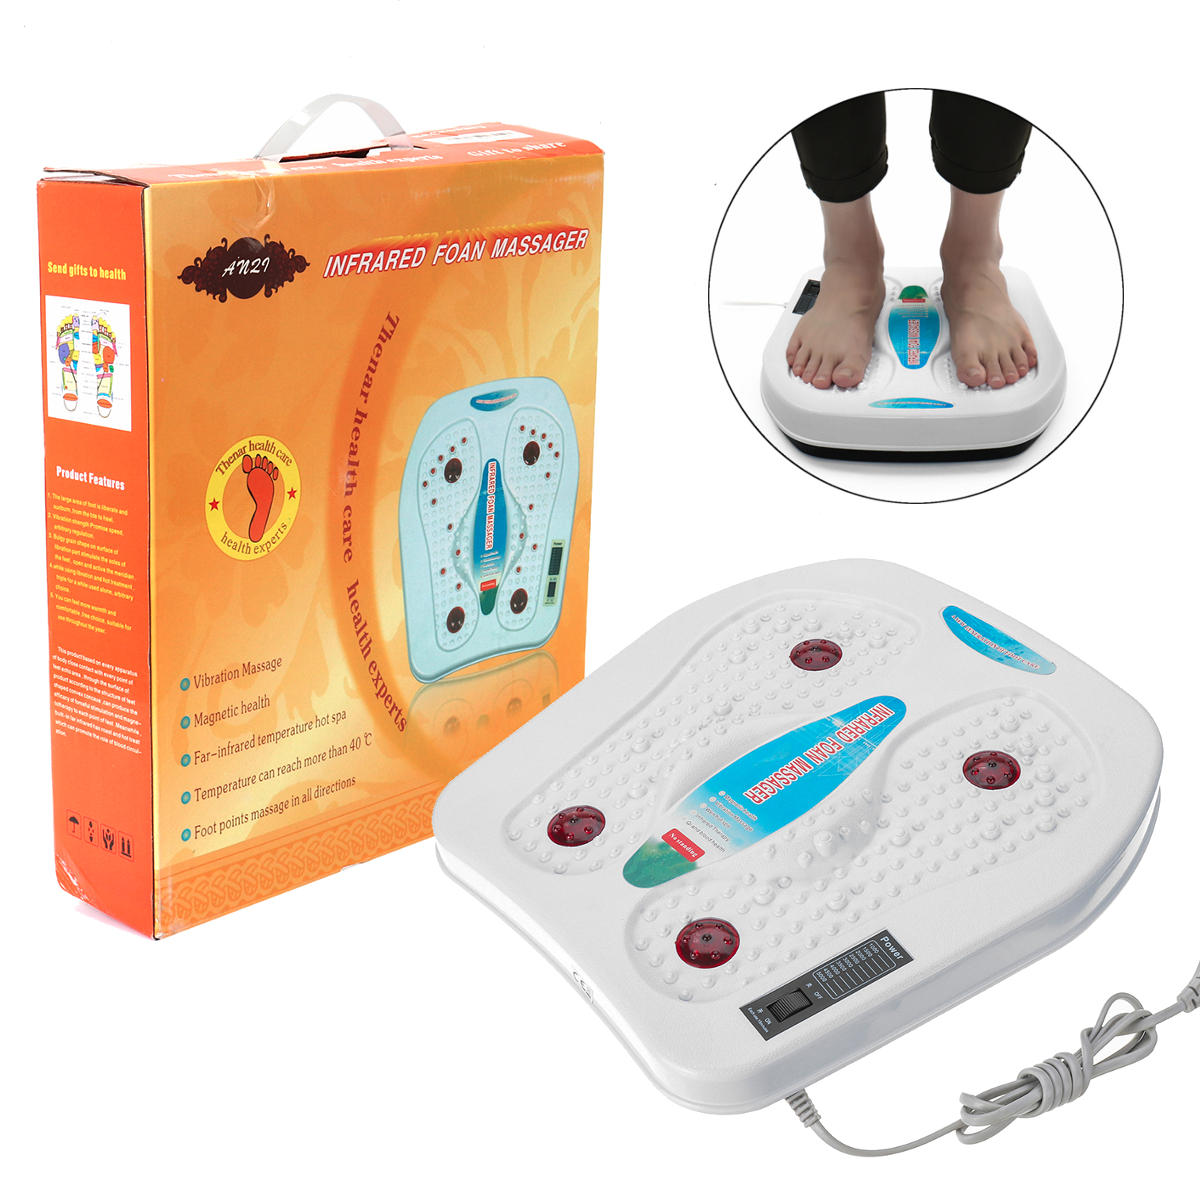 

Electric Foot Massager Machine Vibration Massage Infrared Heating Therapy Leg Spa Relieve Fatigue